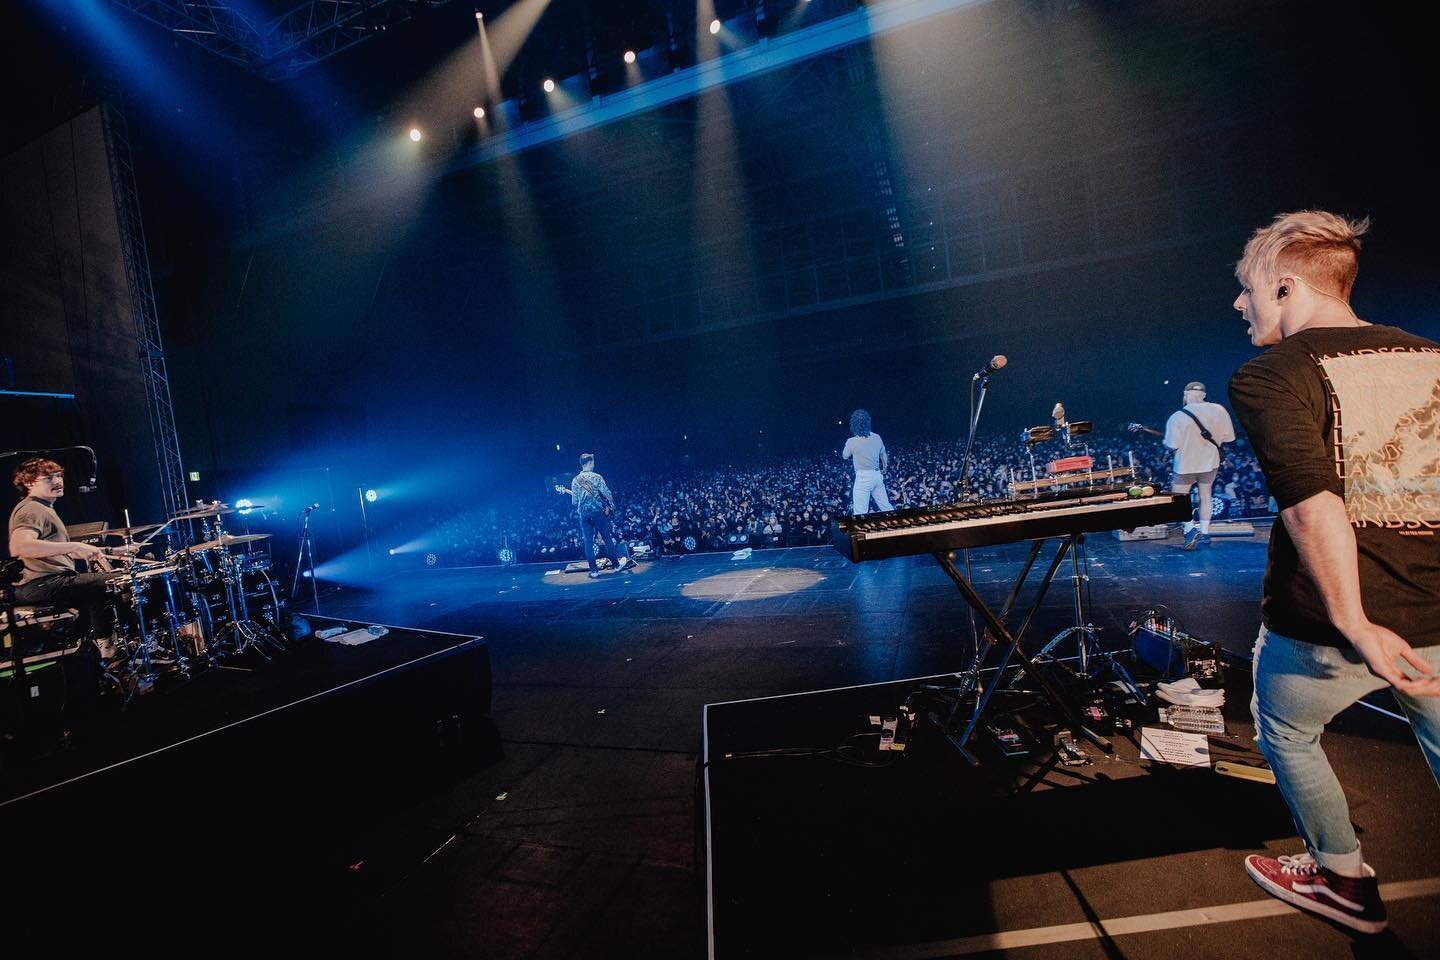 Japan 🇯🇵 Blare Festival | with @donbroco 
-
Liftoff 🚀
-
*Chefs kiss*